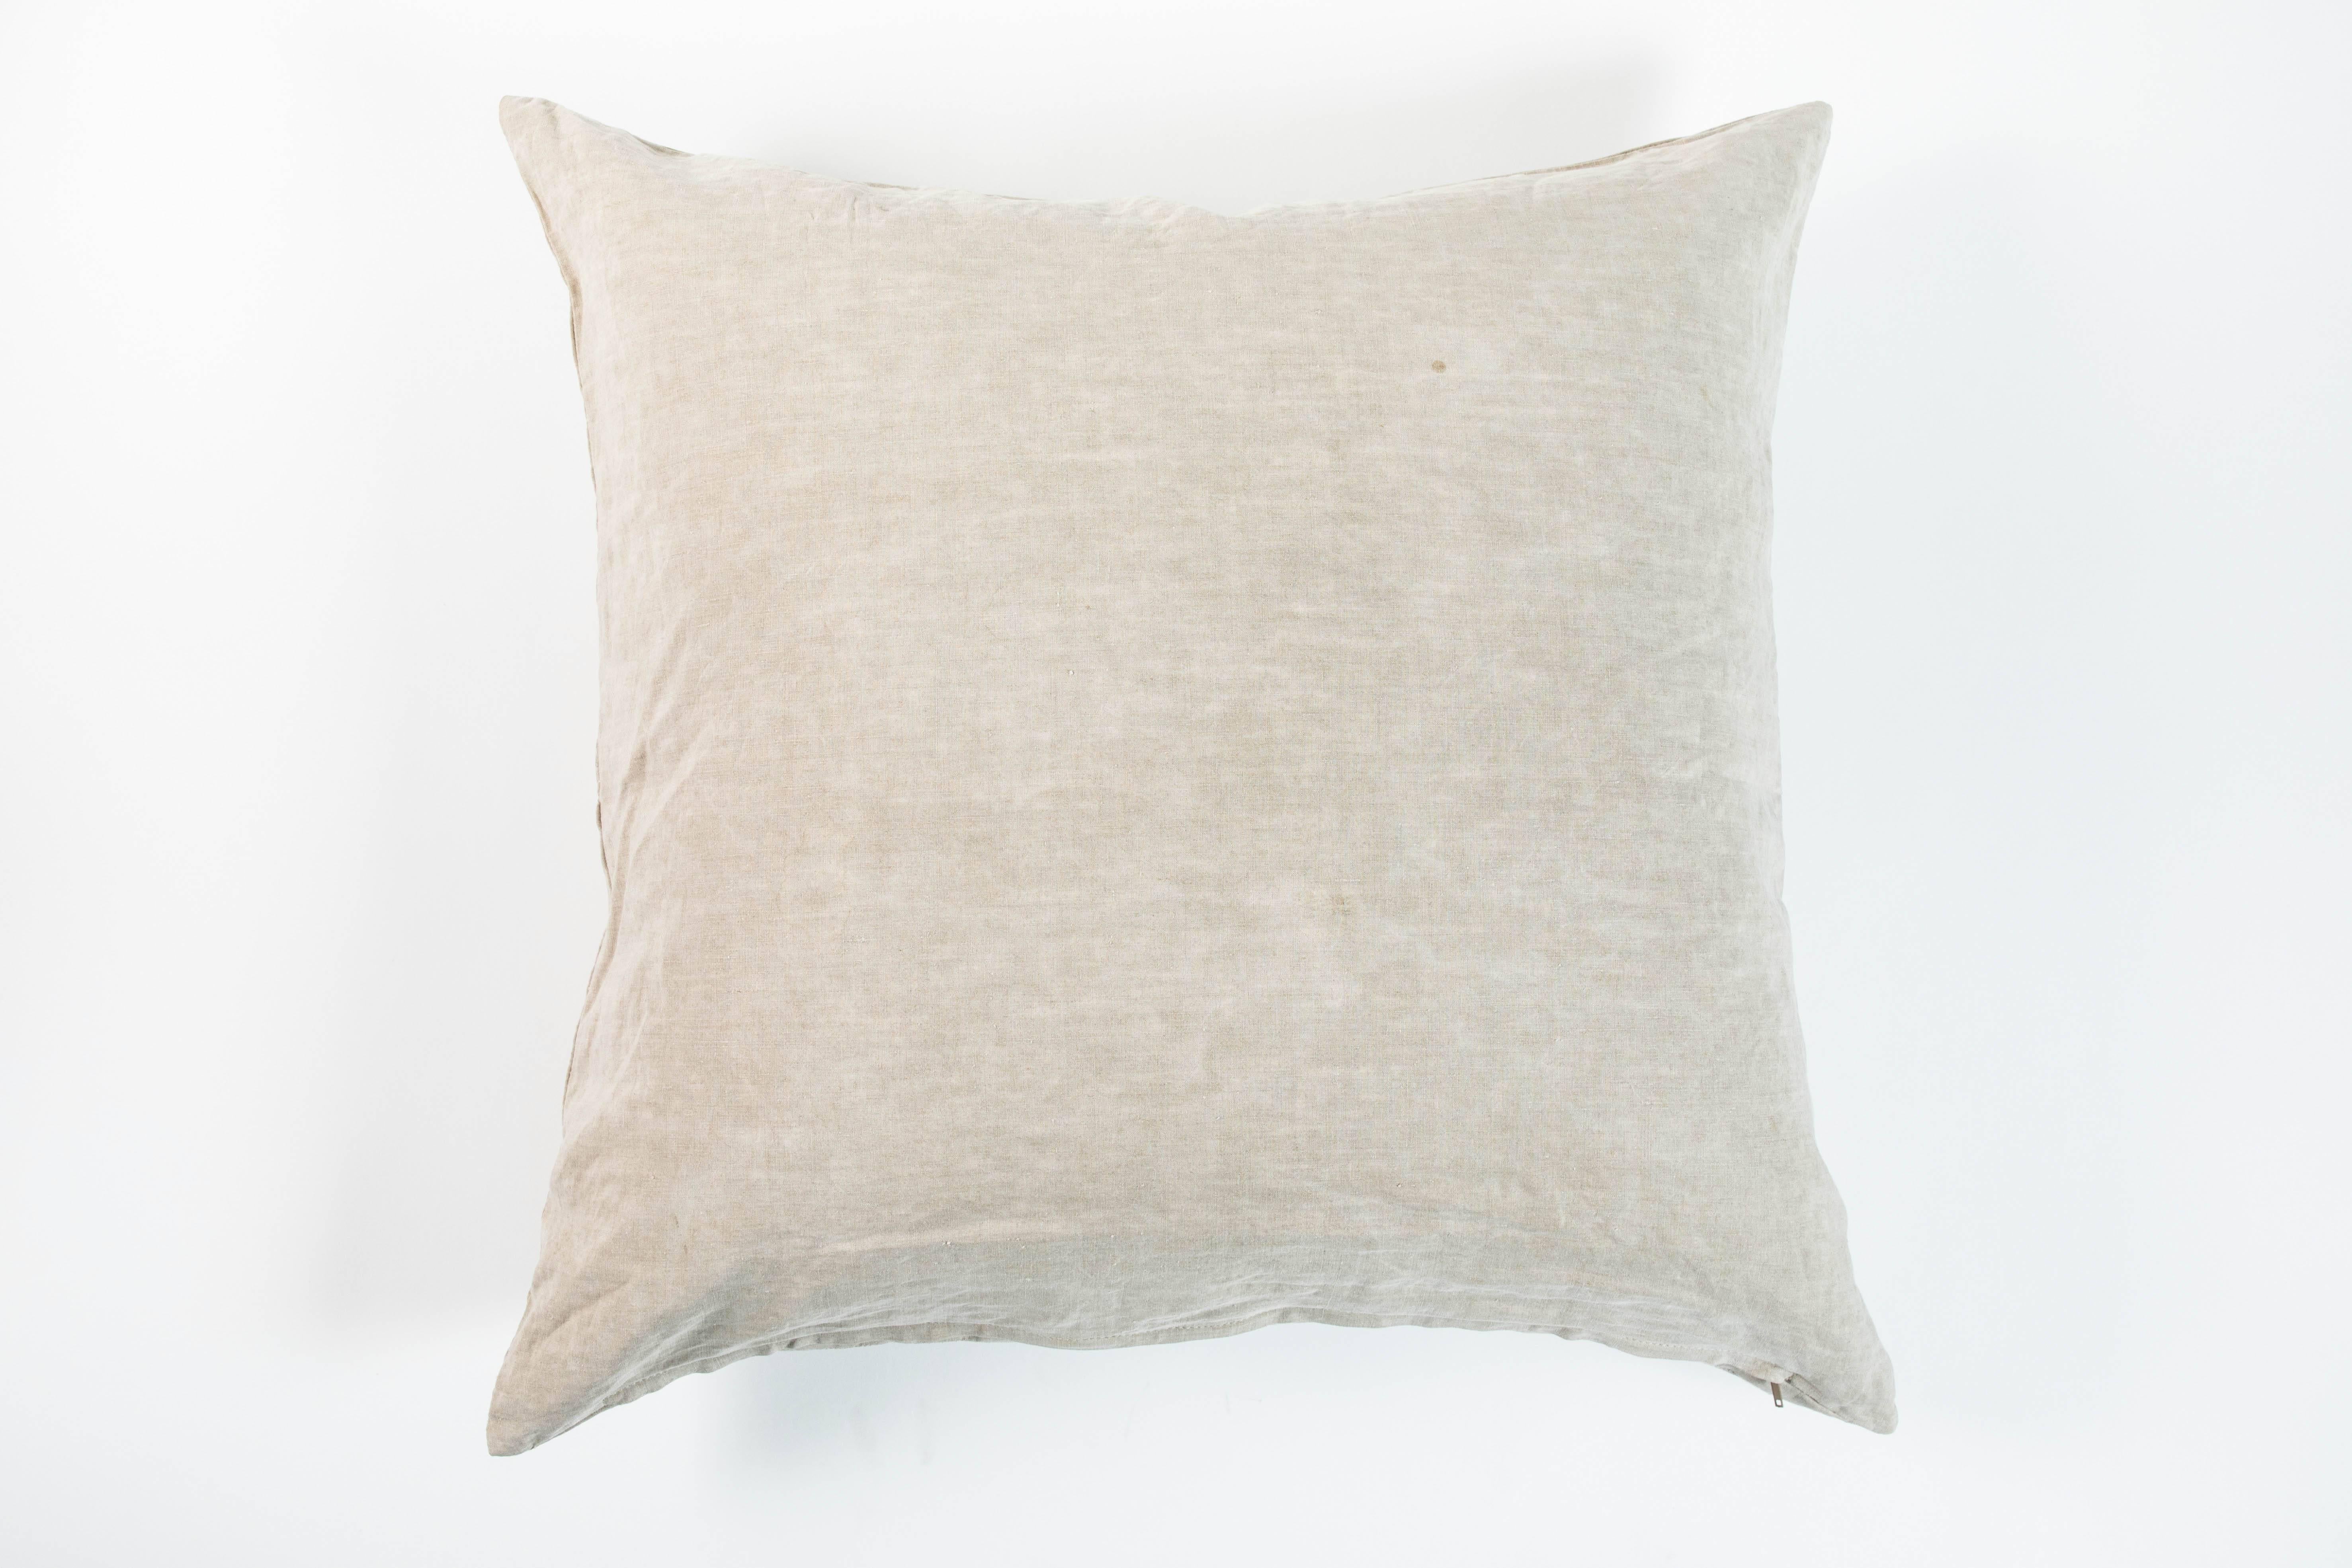 Custom Pillow Made from Vintage Linen Table Cloth 1